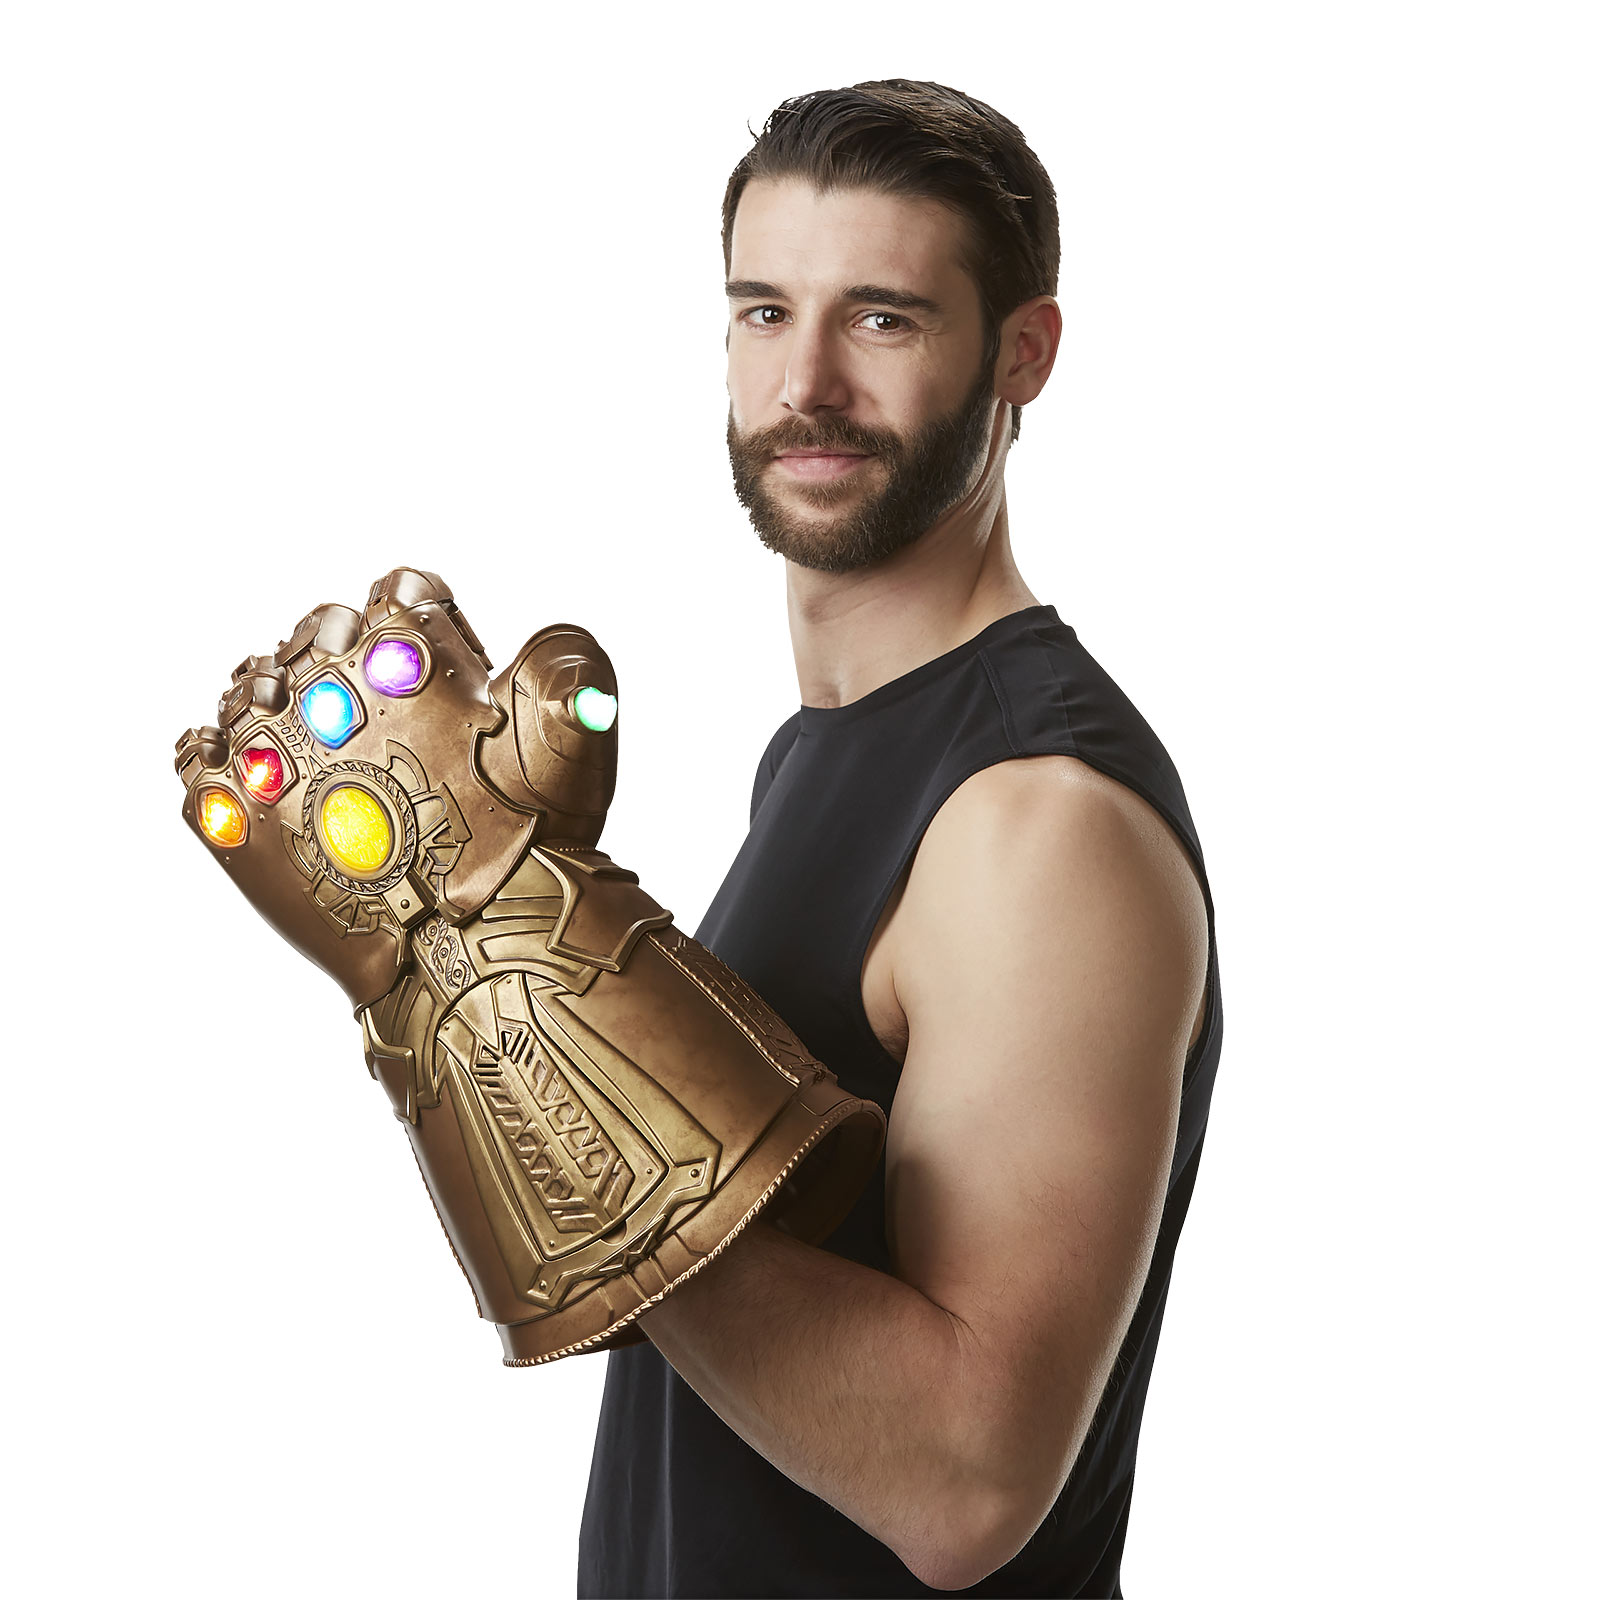 Avengers - Thanos Infinity Gauntlet with Light and Sound